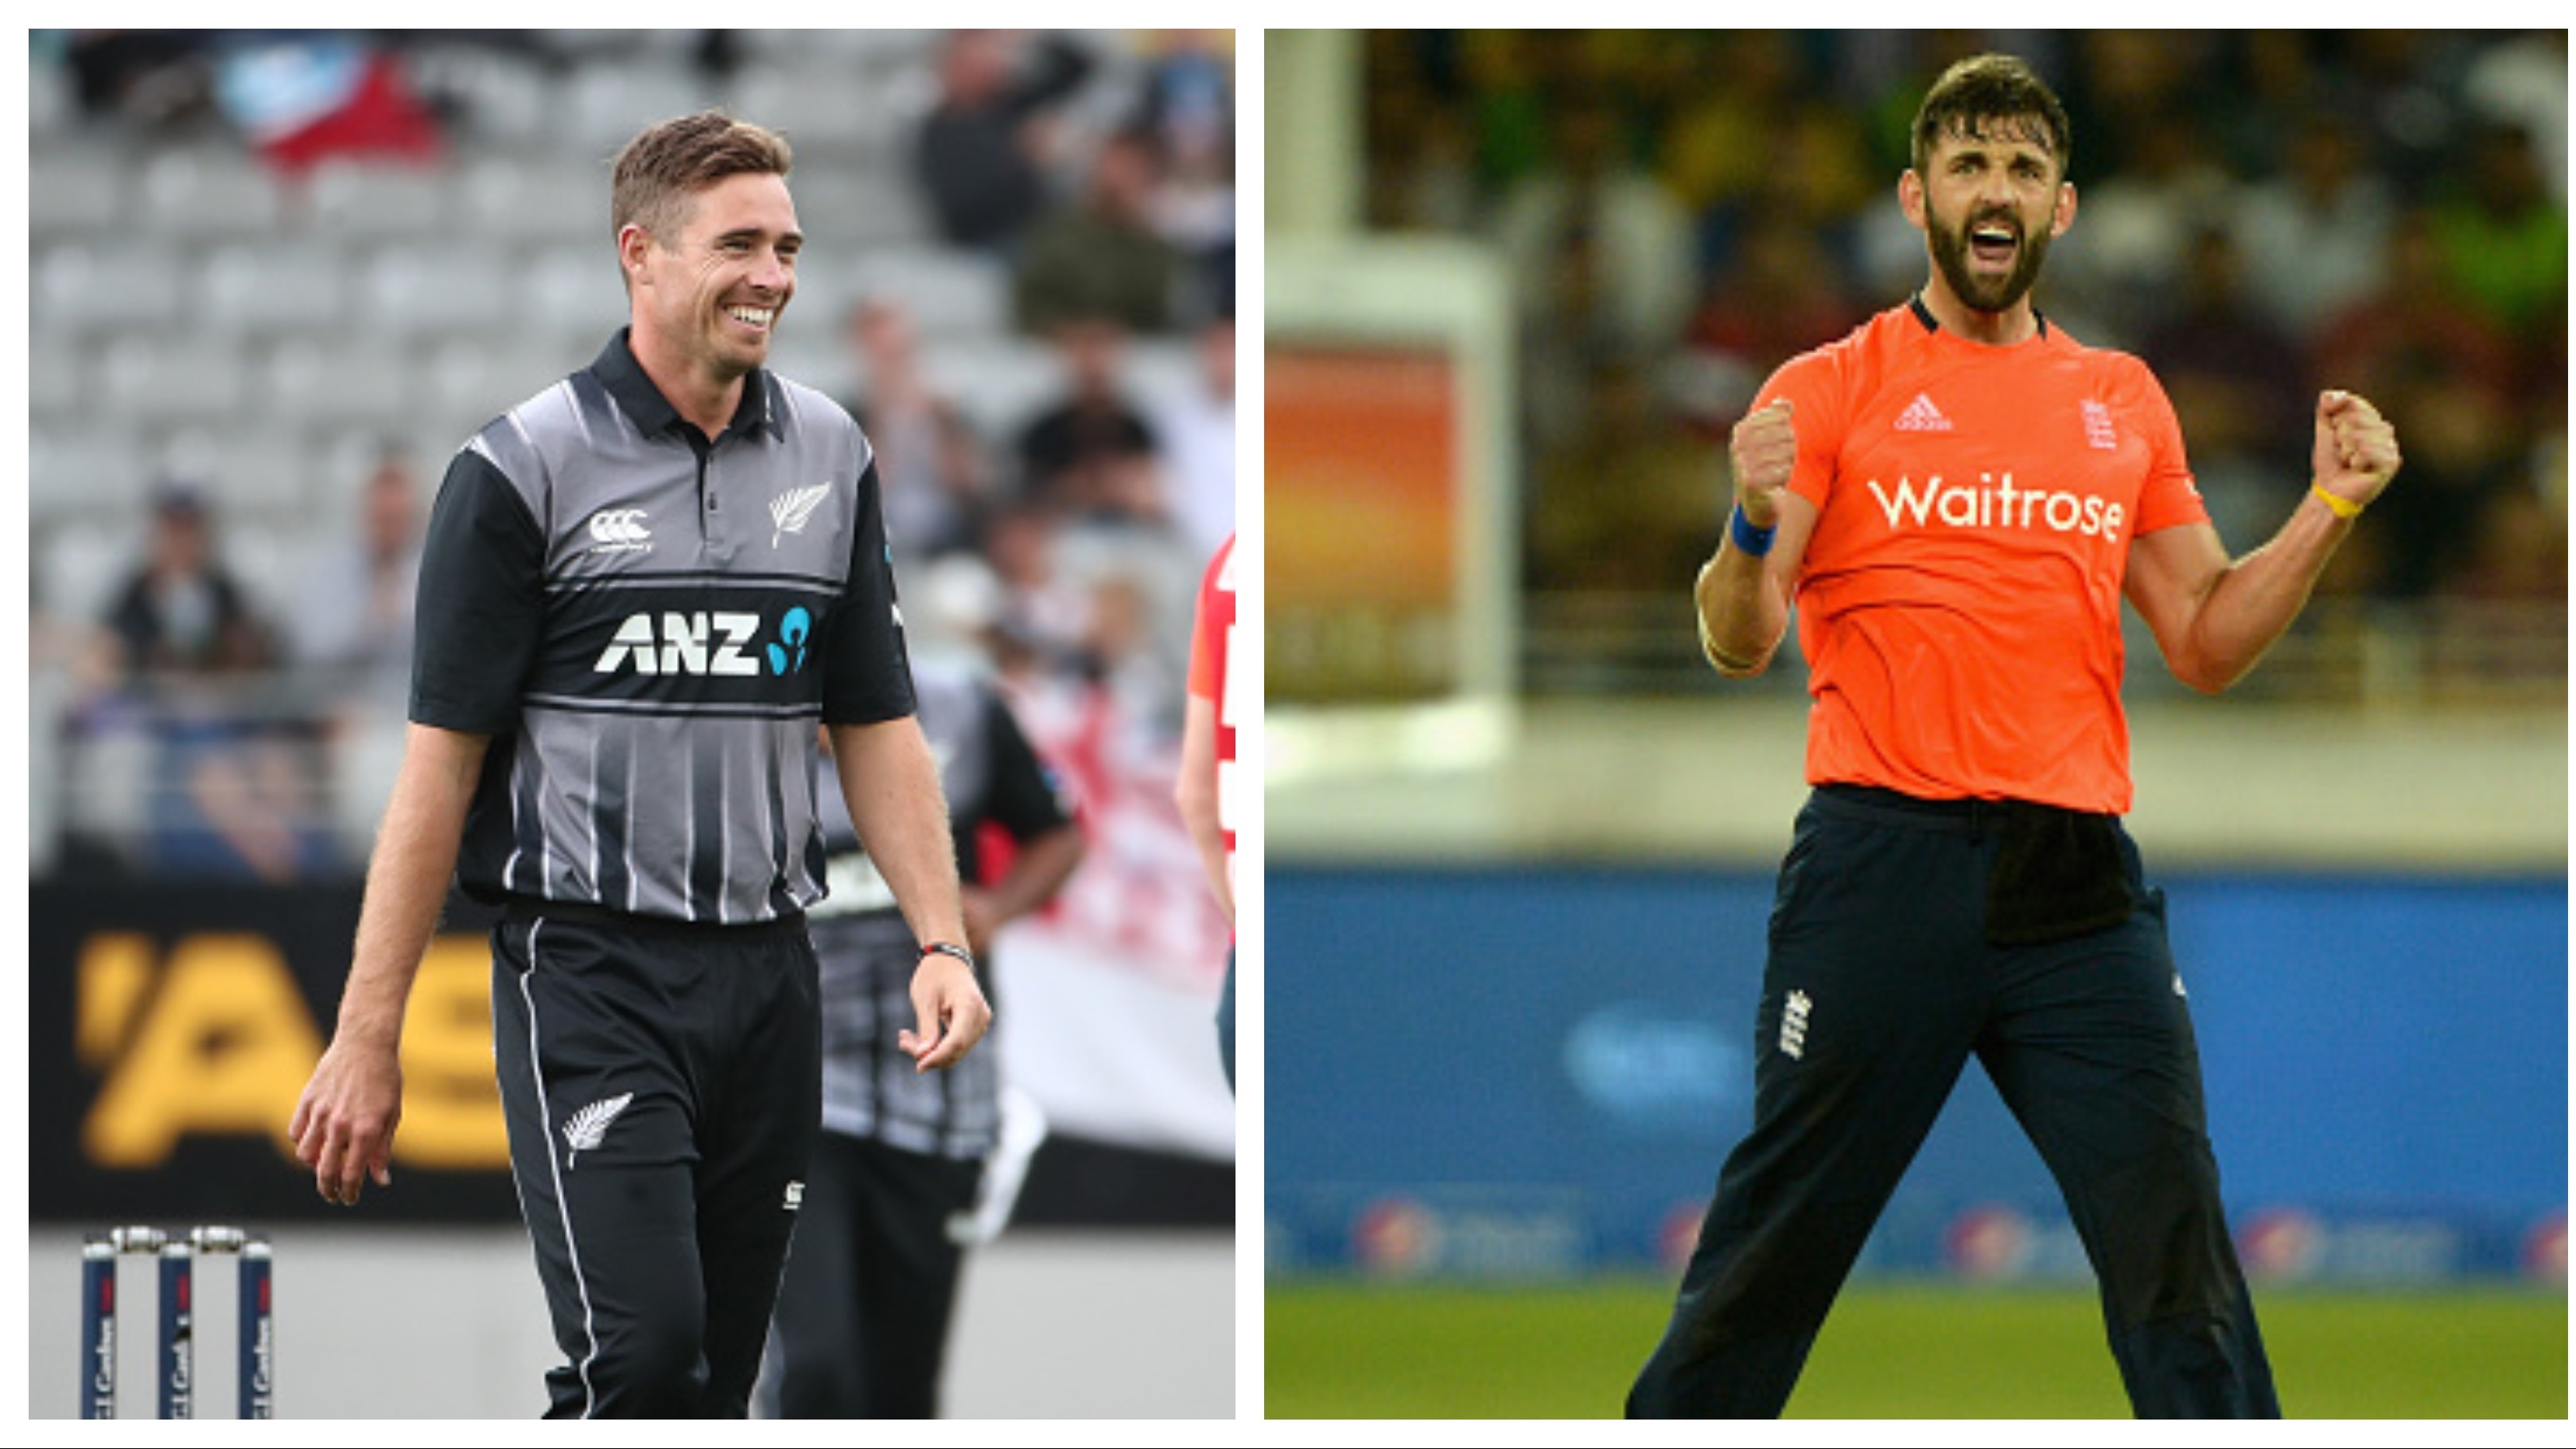 Liam Plunkett, Tim Southee listed among 93 international players for LPL T20: report